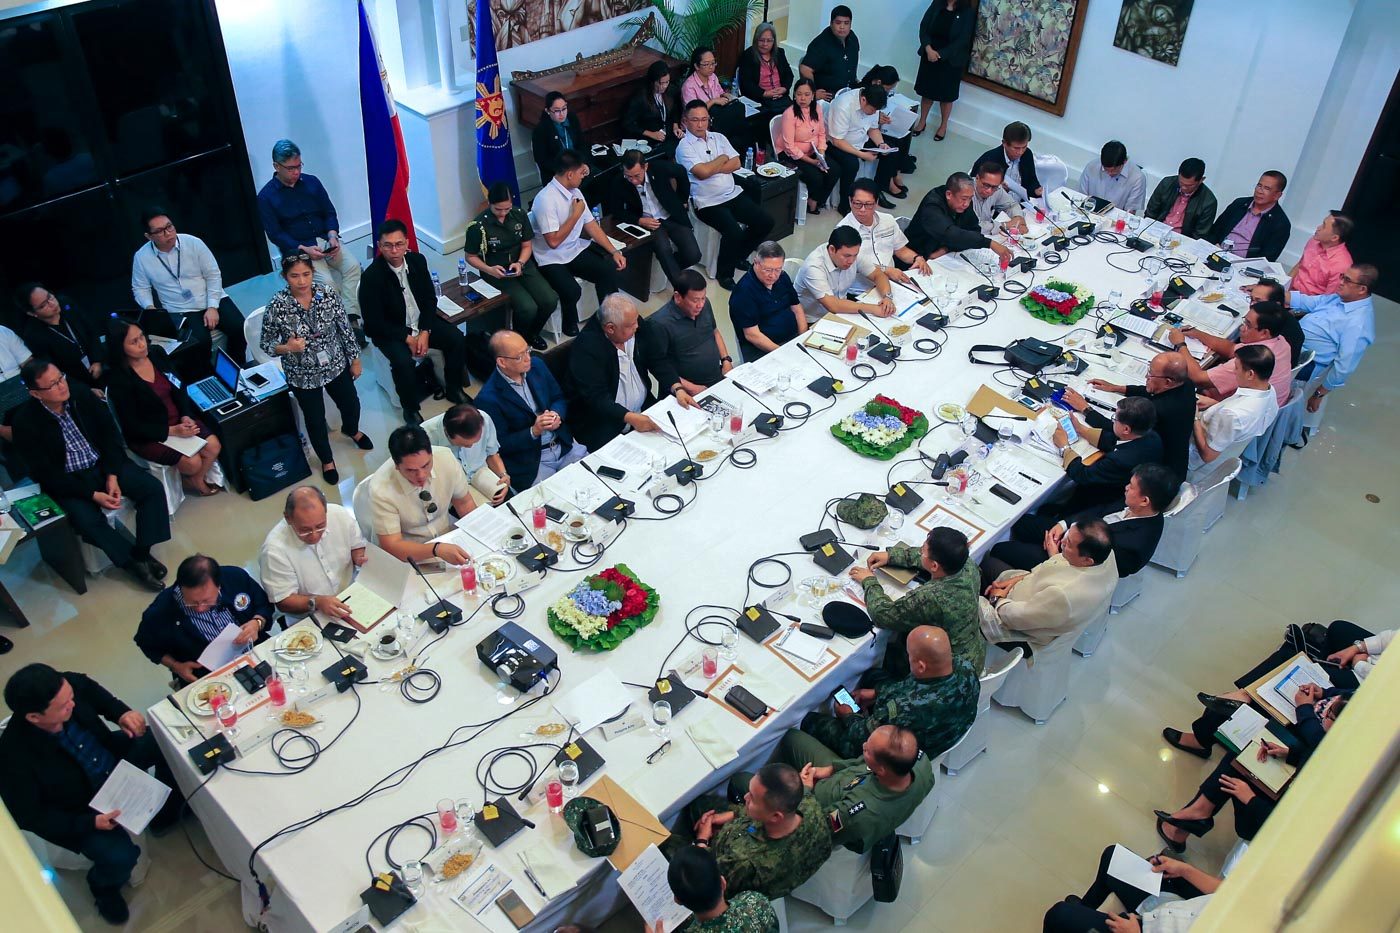 CABINET MEETING. President Rodrigo Duterte presides over a special Cabinet meeting at the Presidential Guest House in Panacan, Davao City on May 25, 2017. The President called for a special Cabinet meeting after declaring Martial Law in Mindanao on May 23, 2017. Malacañang photo
   